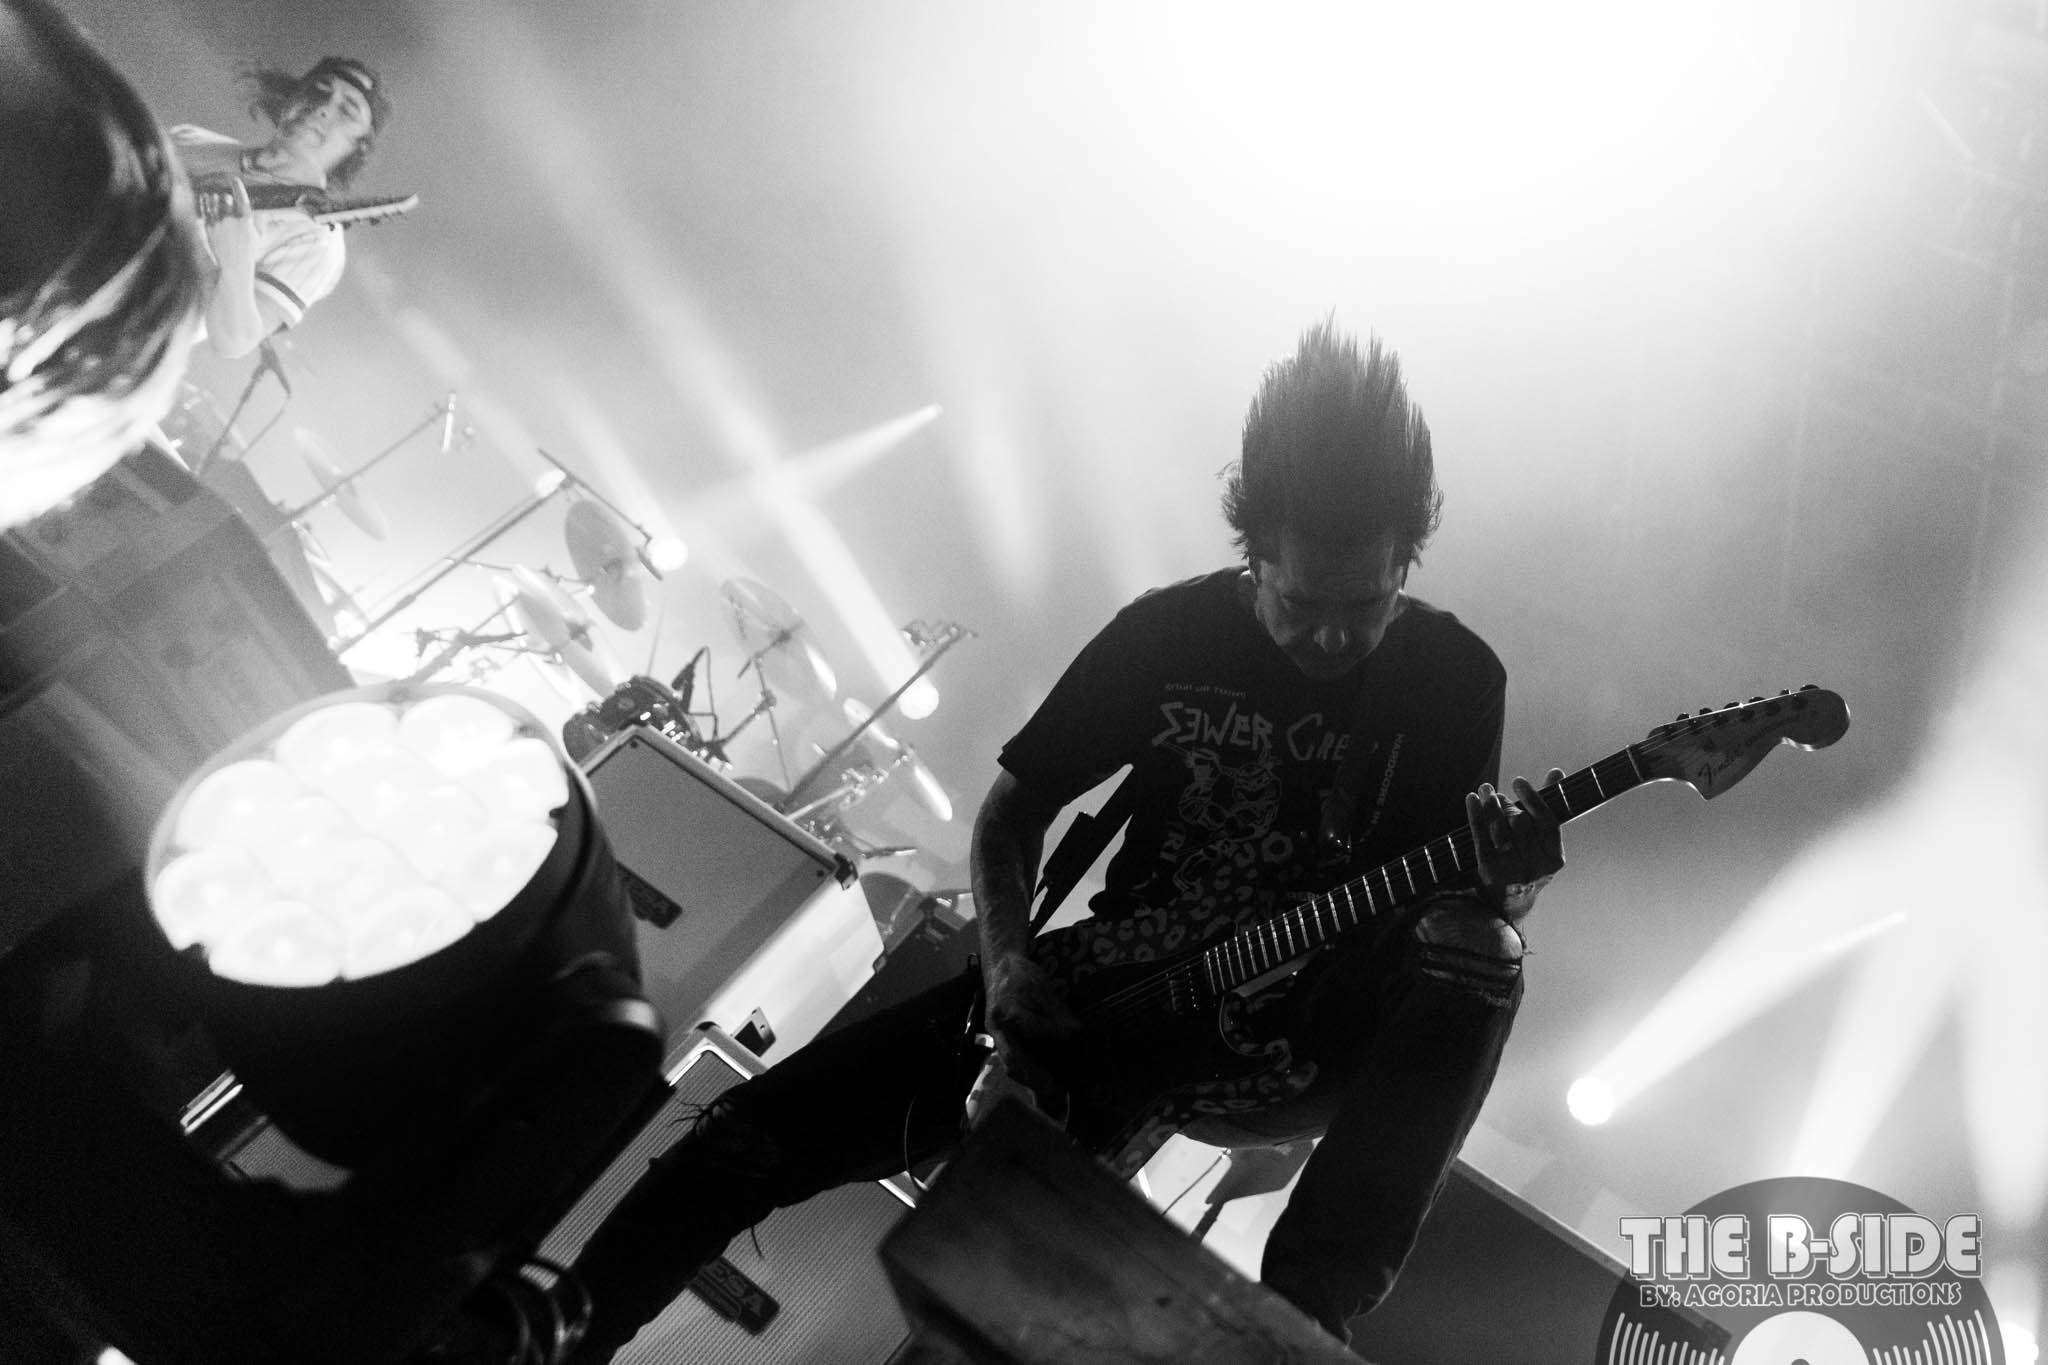 Lead guitarist Tony Perry performing live in Toronto with Pierce the Veil on Oct. 5, 2022. Taken By Leo Montero, Truffle Images, The B-Side Blog